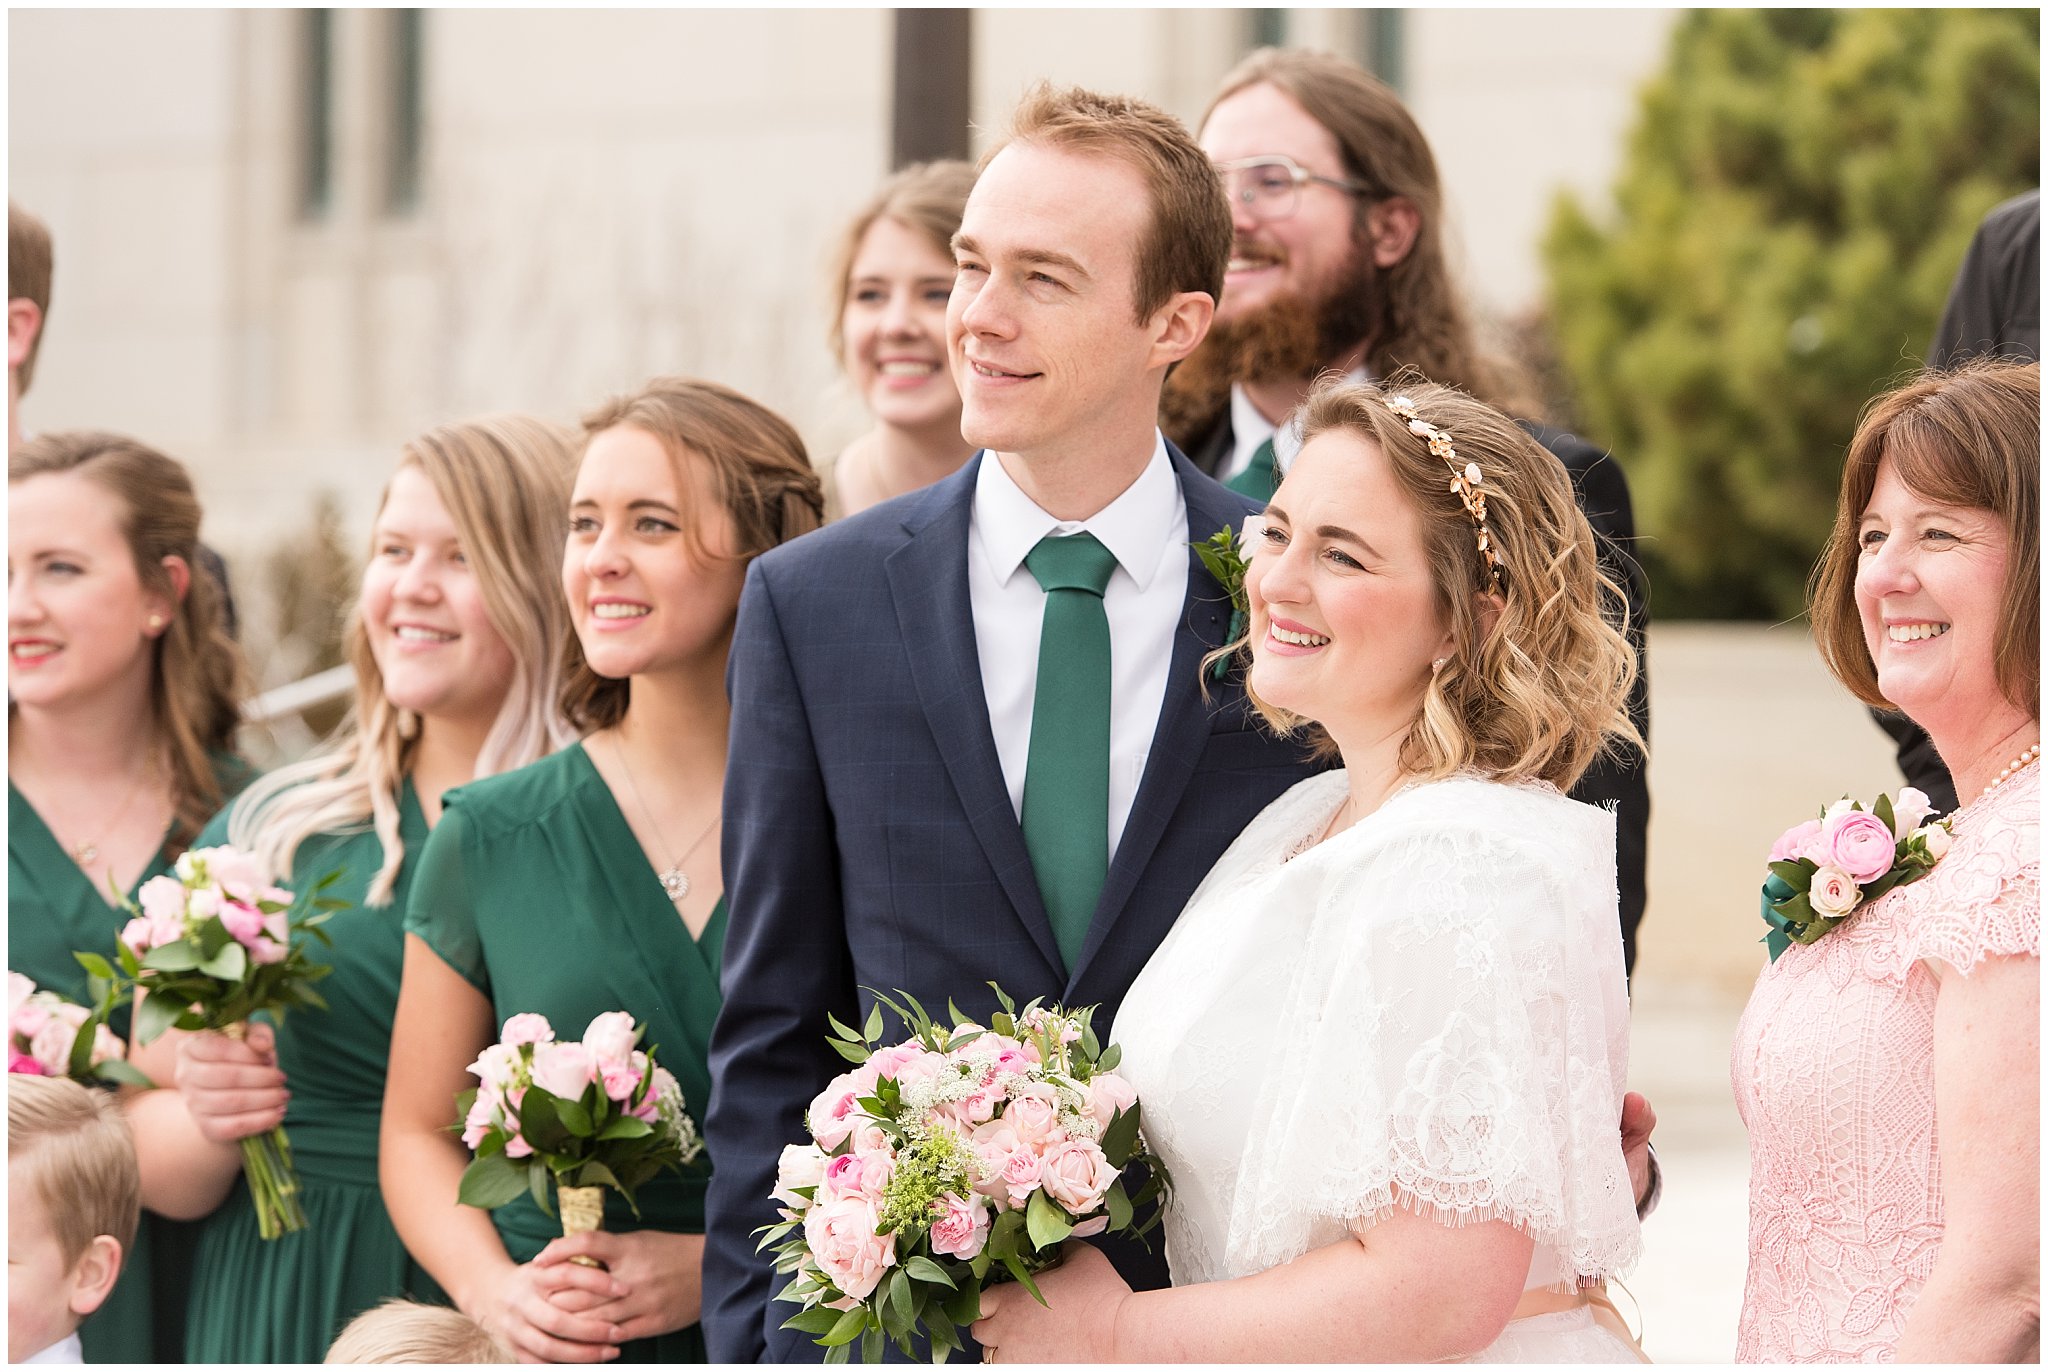 Family pictures at the temple | Ogden Temple Winter Wedding | Emerald Green and Pink Wedding | Jessie and Dallin Photography